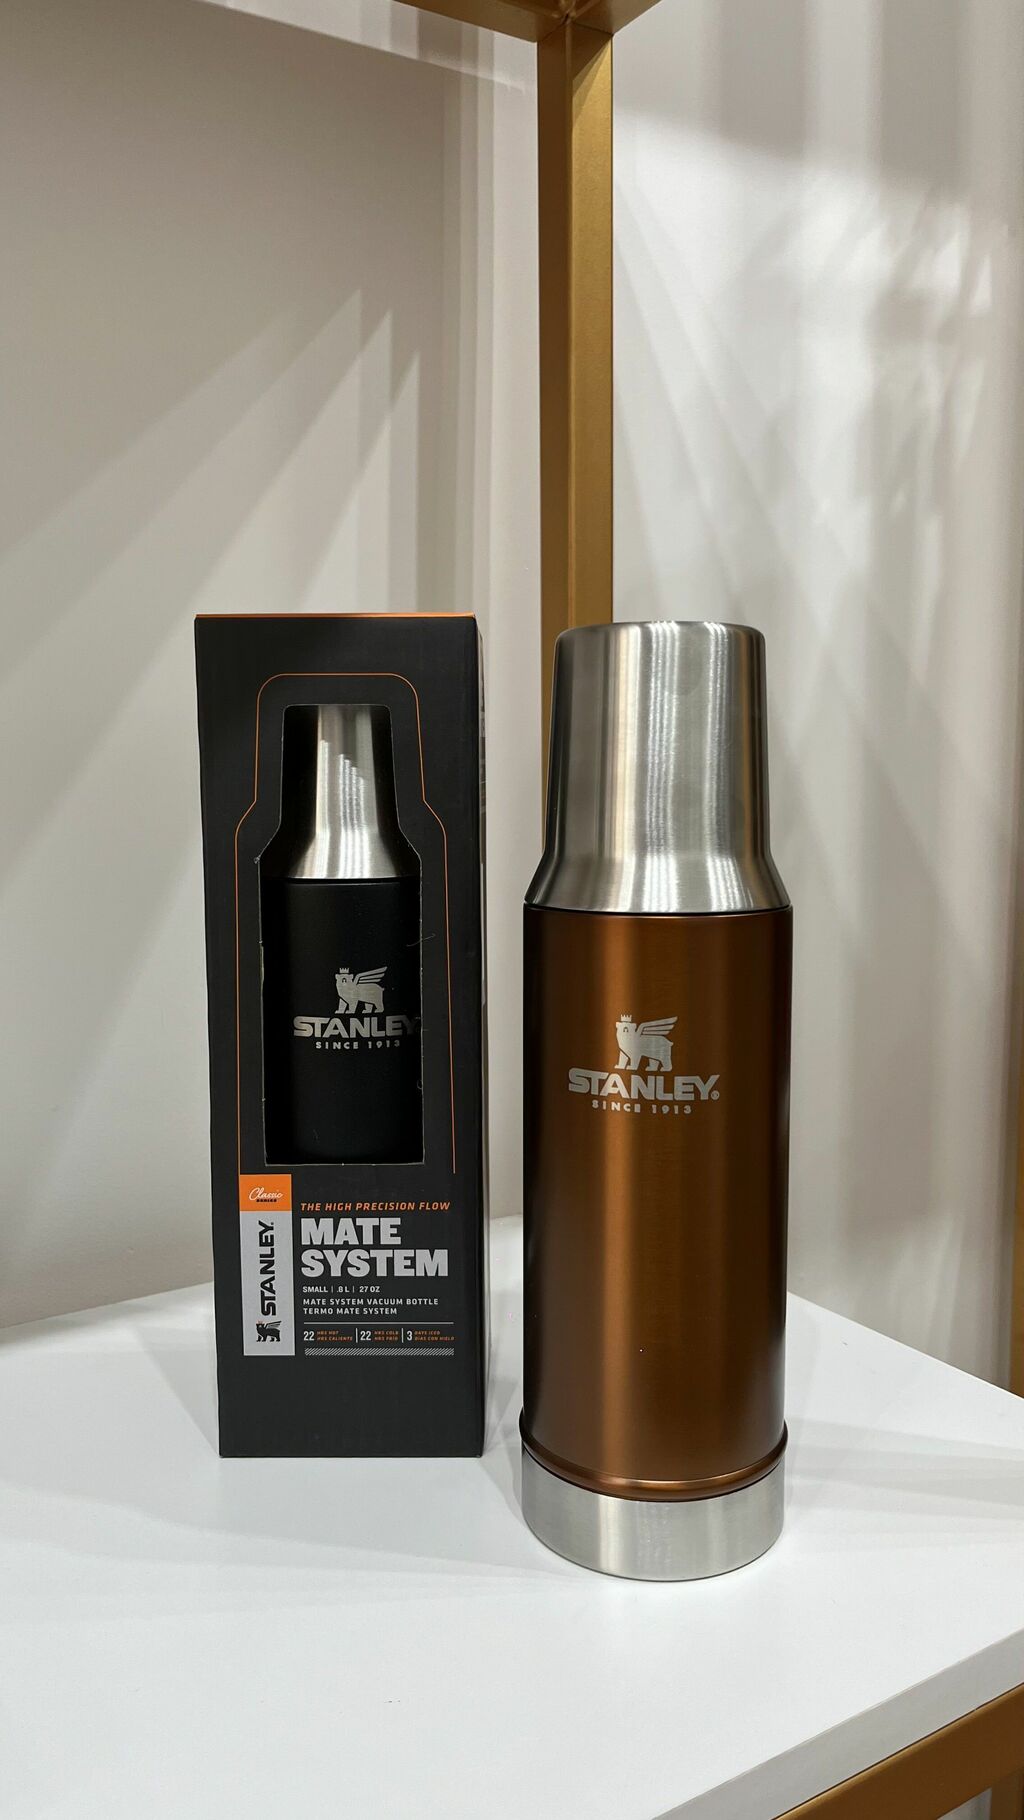 Mate System 800ml